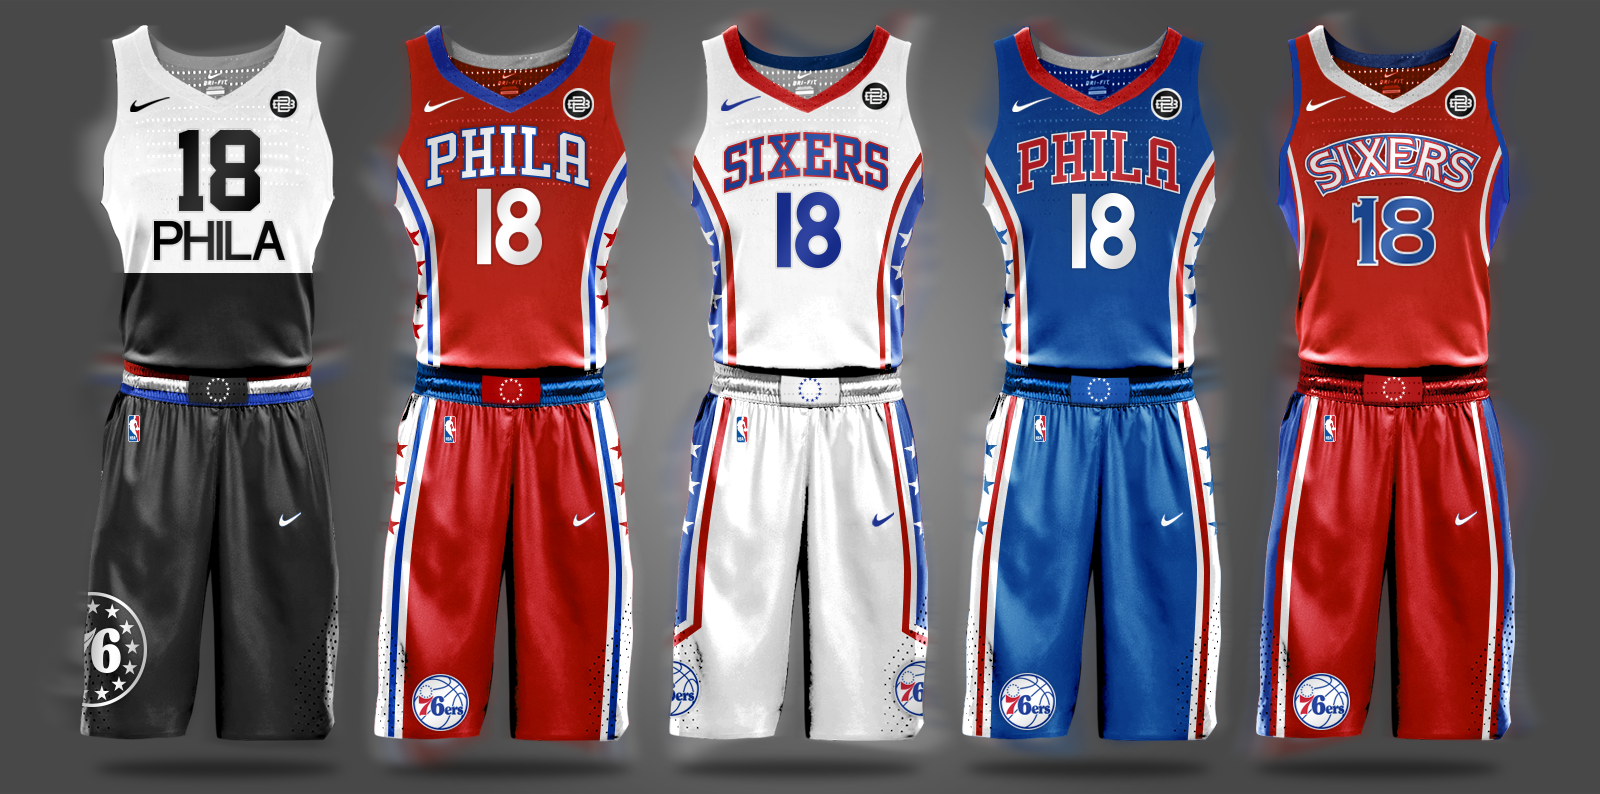 NBA Buzz - Leaked Philadelphia 76ers throwback alternate uniforms for 2021-22  👀 The jerseys are inspired by the jerseys & logo design from the early  1970s! 🔥 or 🗑? (Camisas da NBA